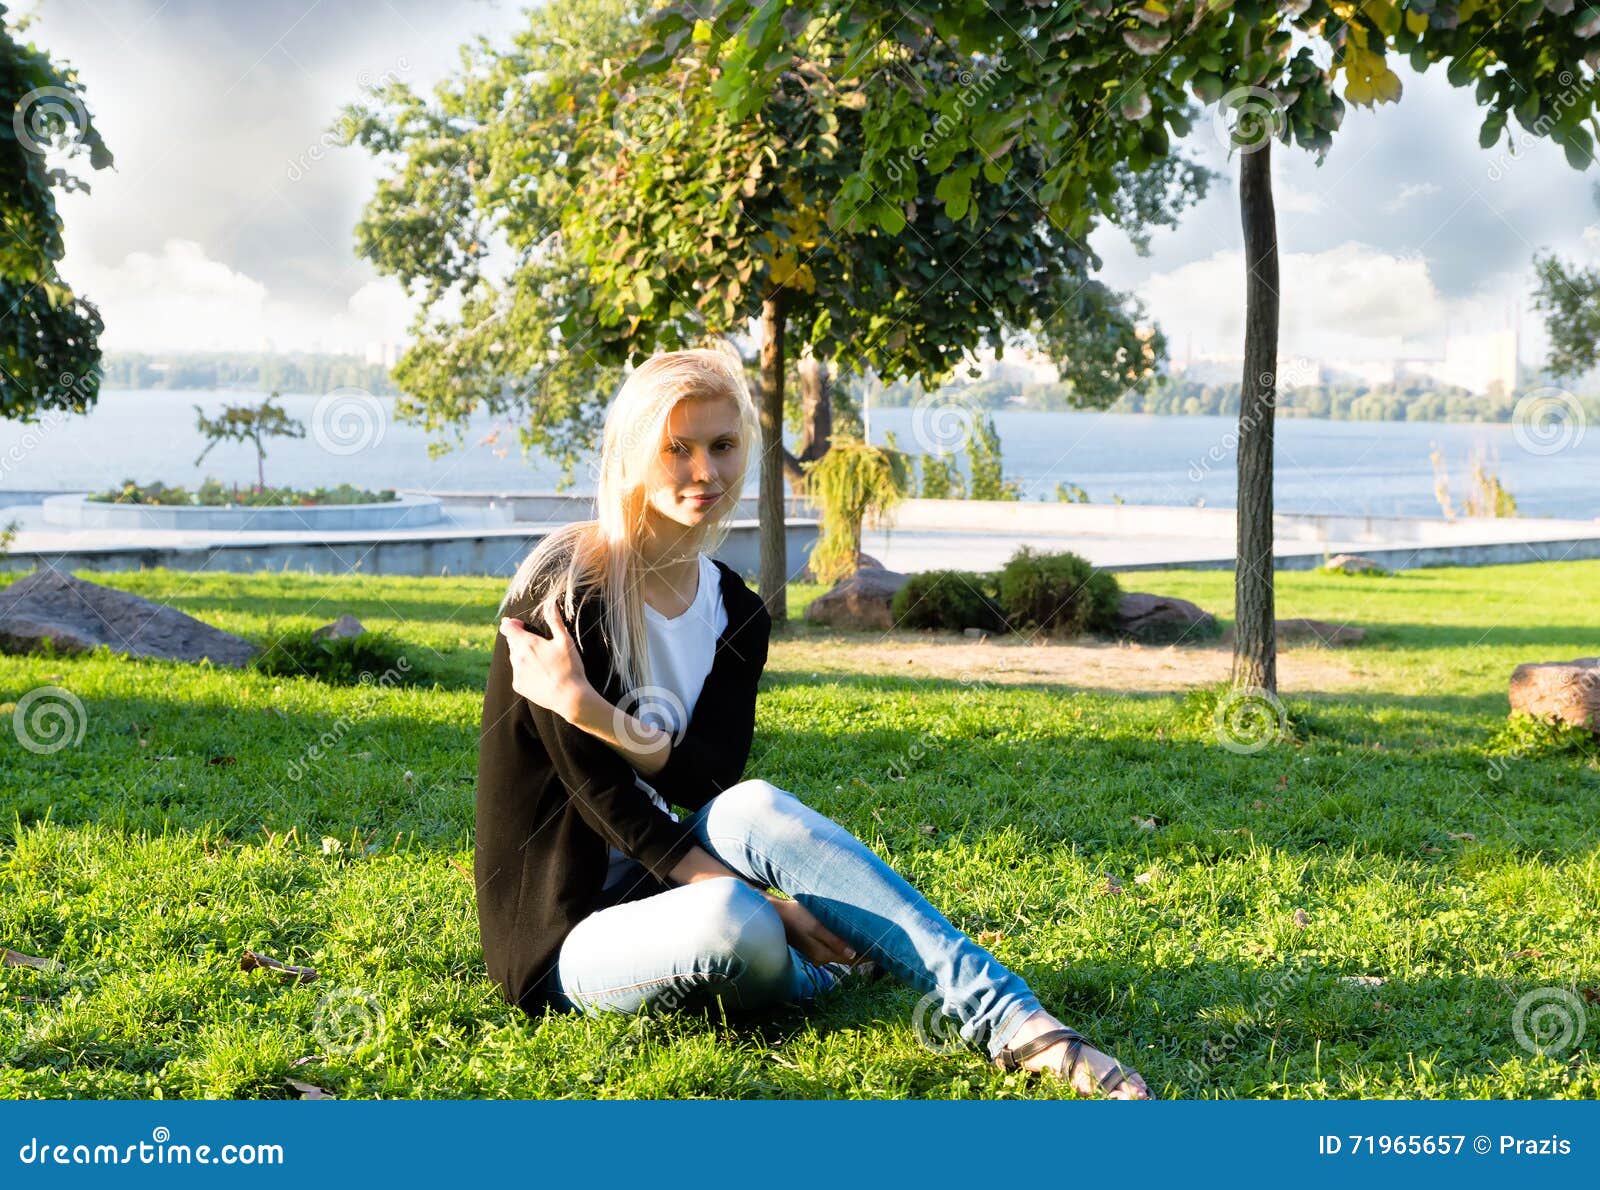 Lonely Woman is Resting Sitting on the Grass in the Park Stock Image ...